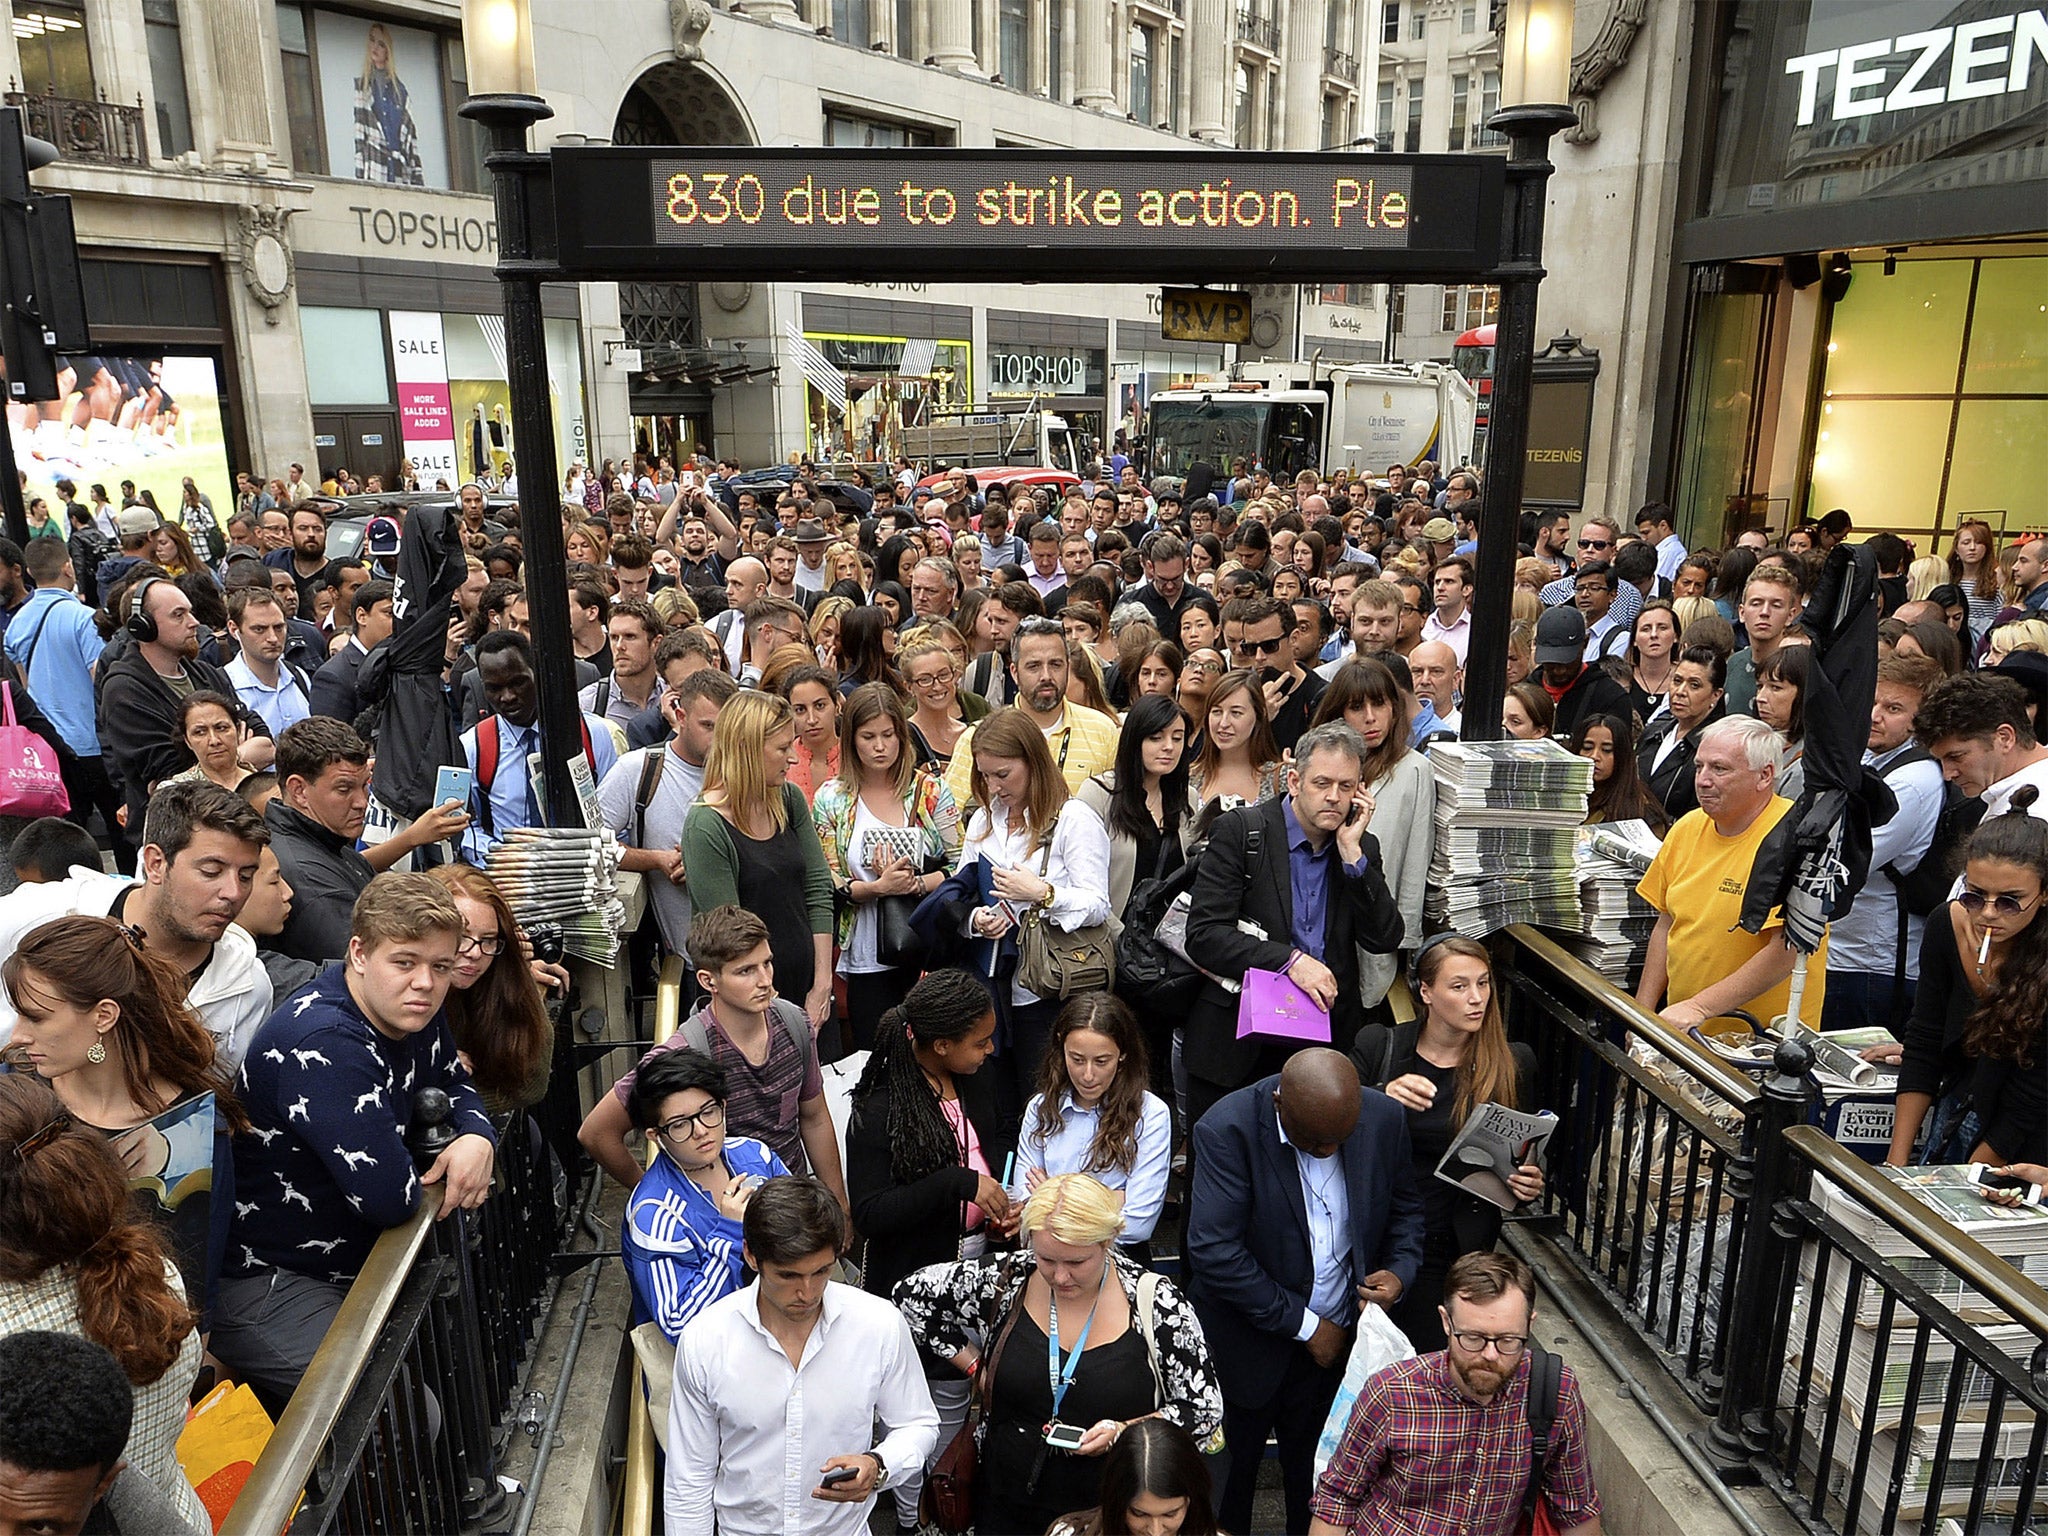 People queue outside an entrance to Oxford Circus underground tube station prior to the strike